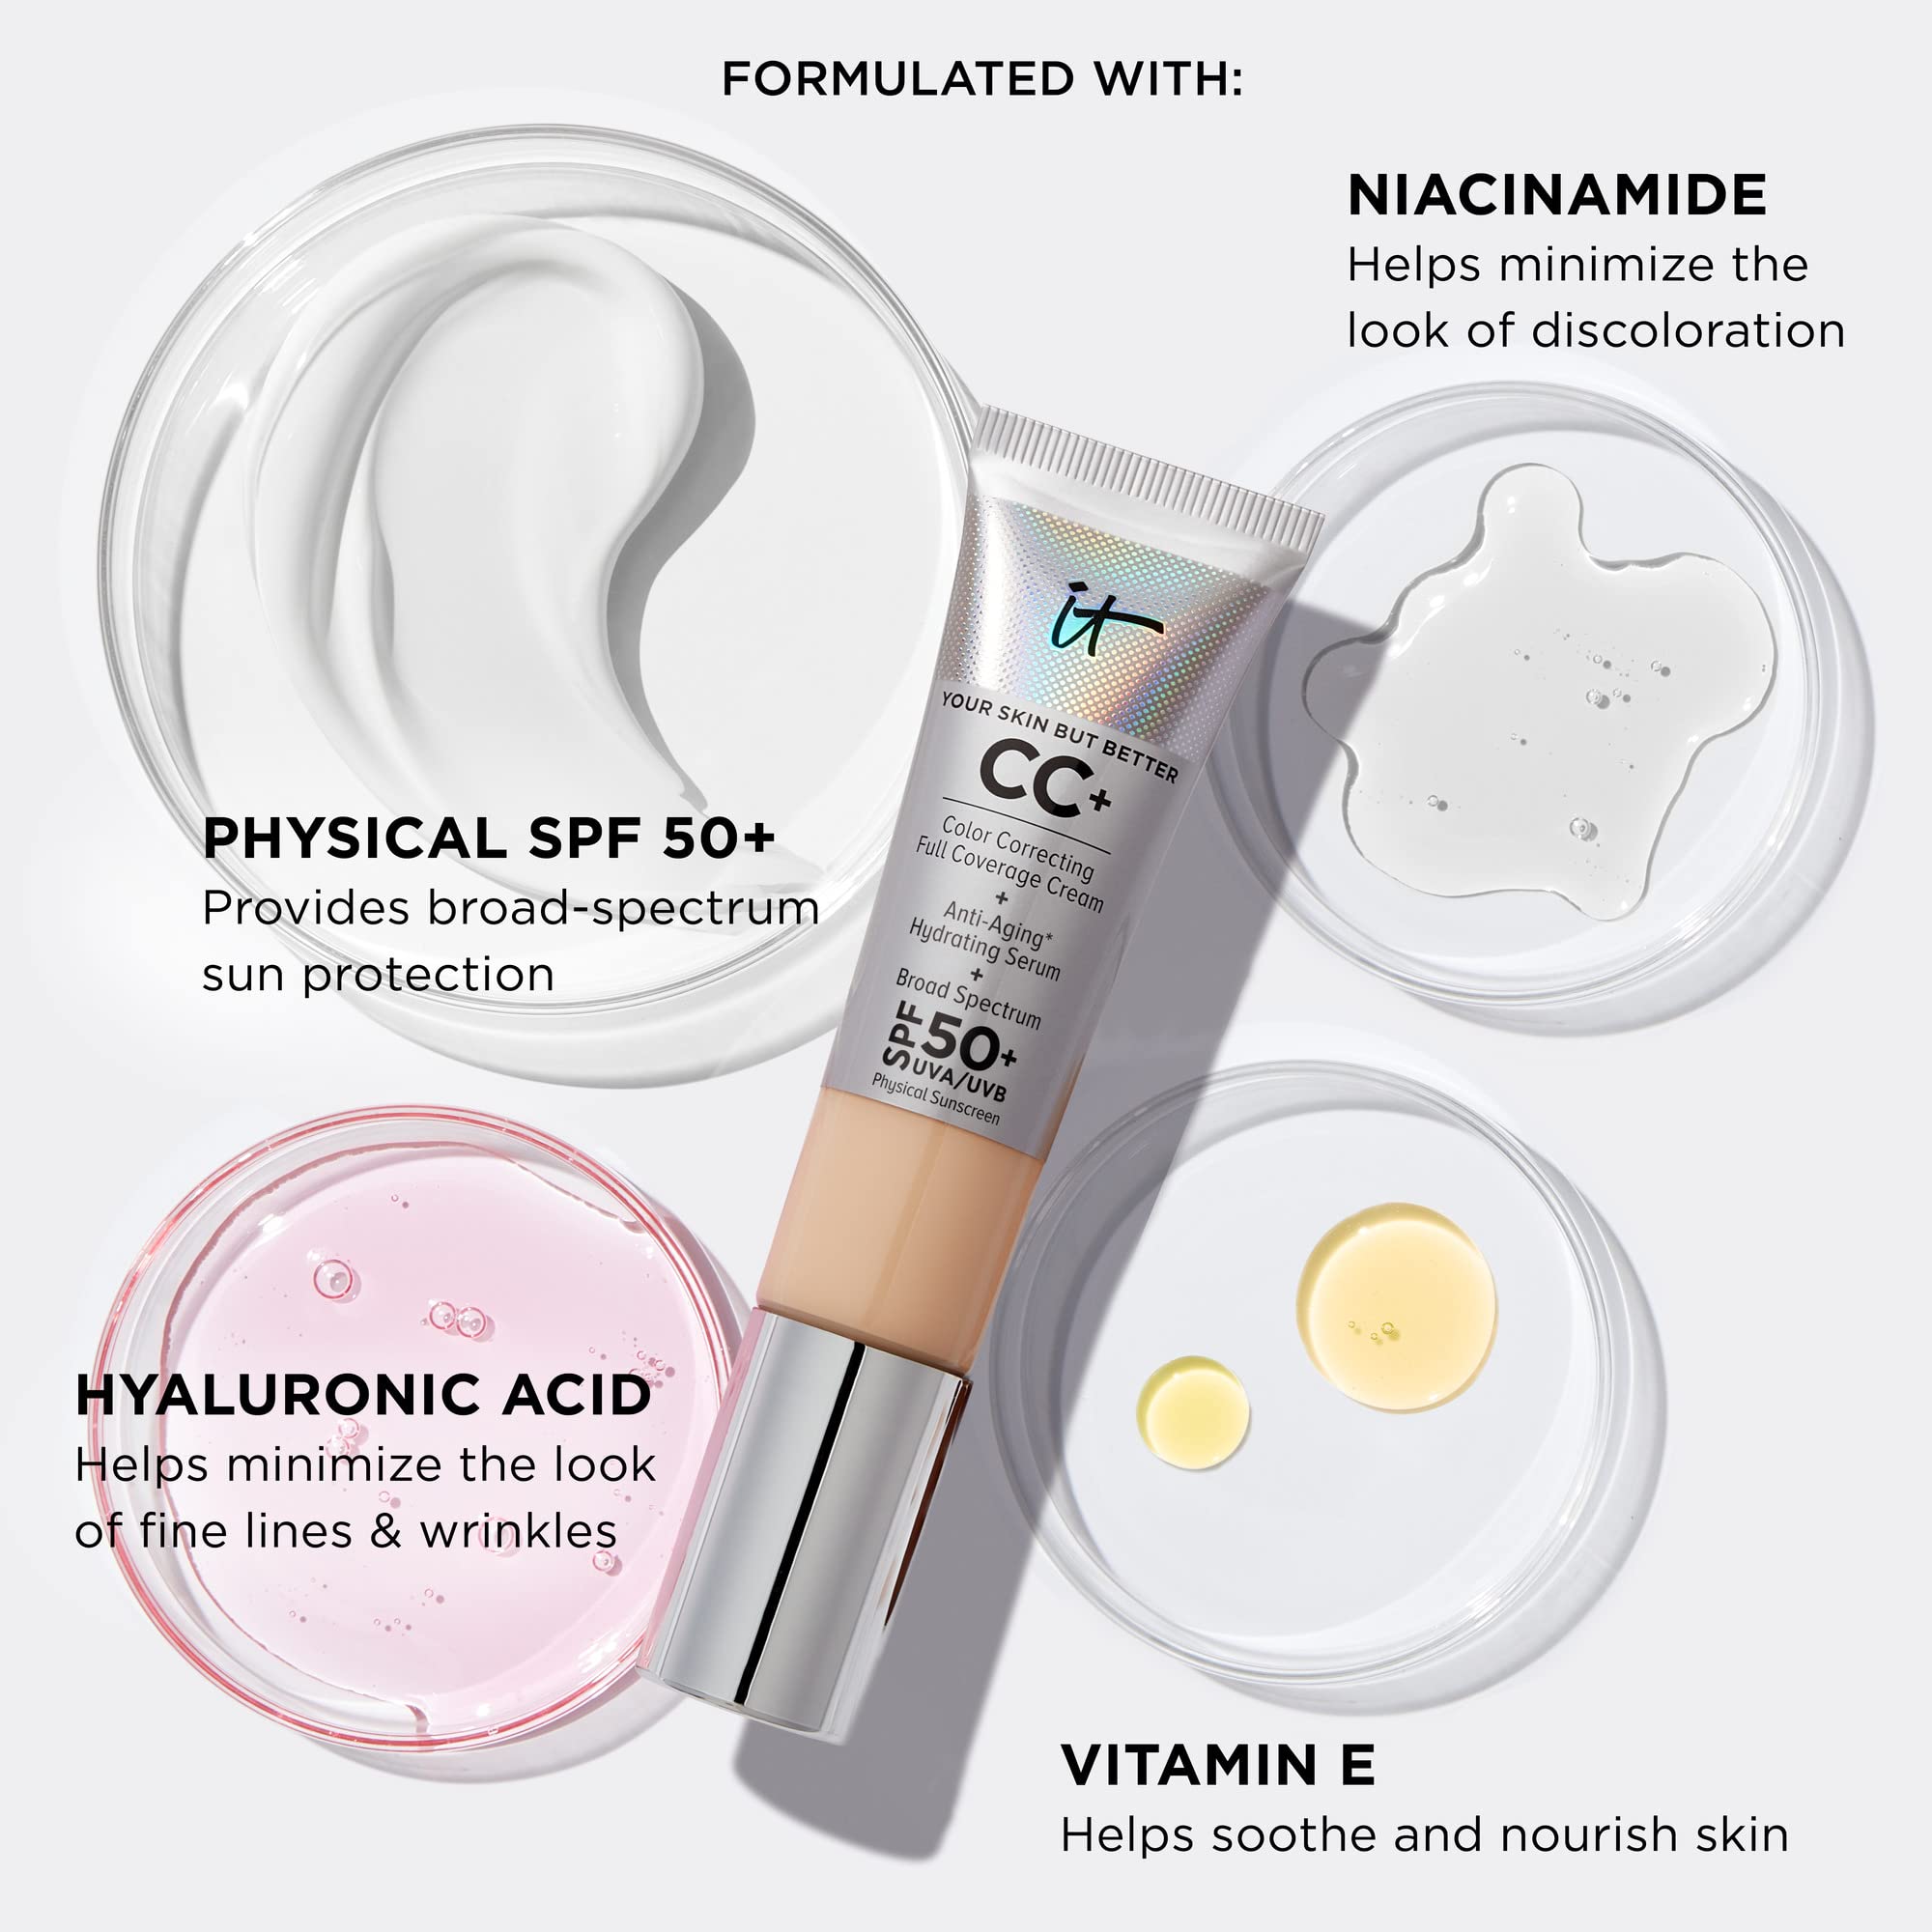 IT Cosmetics Your Skin But Better CC+ Cream - Color Correcting Cream, Full-Coverage Foundation, Hydrating Serum & SPF 50+ Sunscreen - Natural Finish - 1.08 Fl. Oz